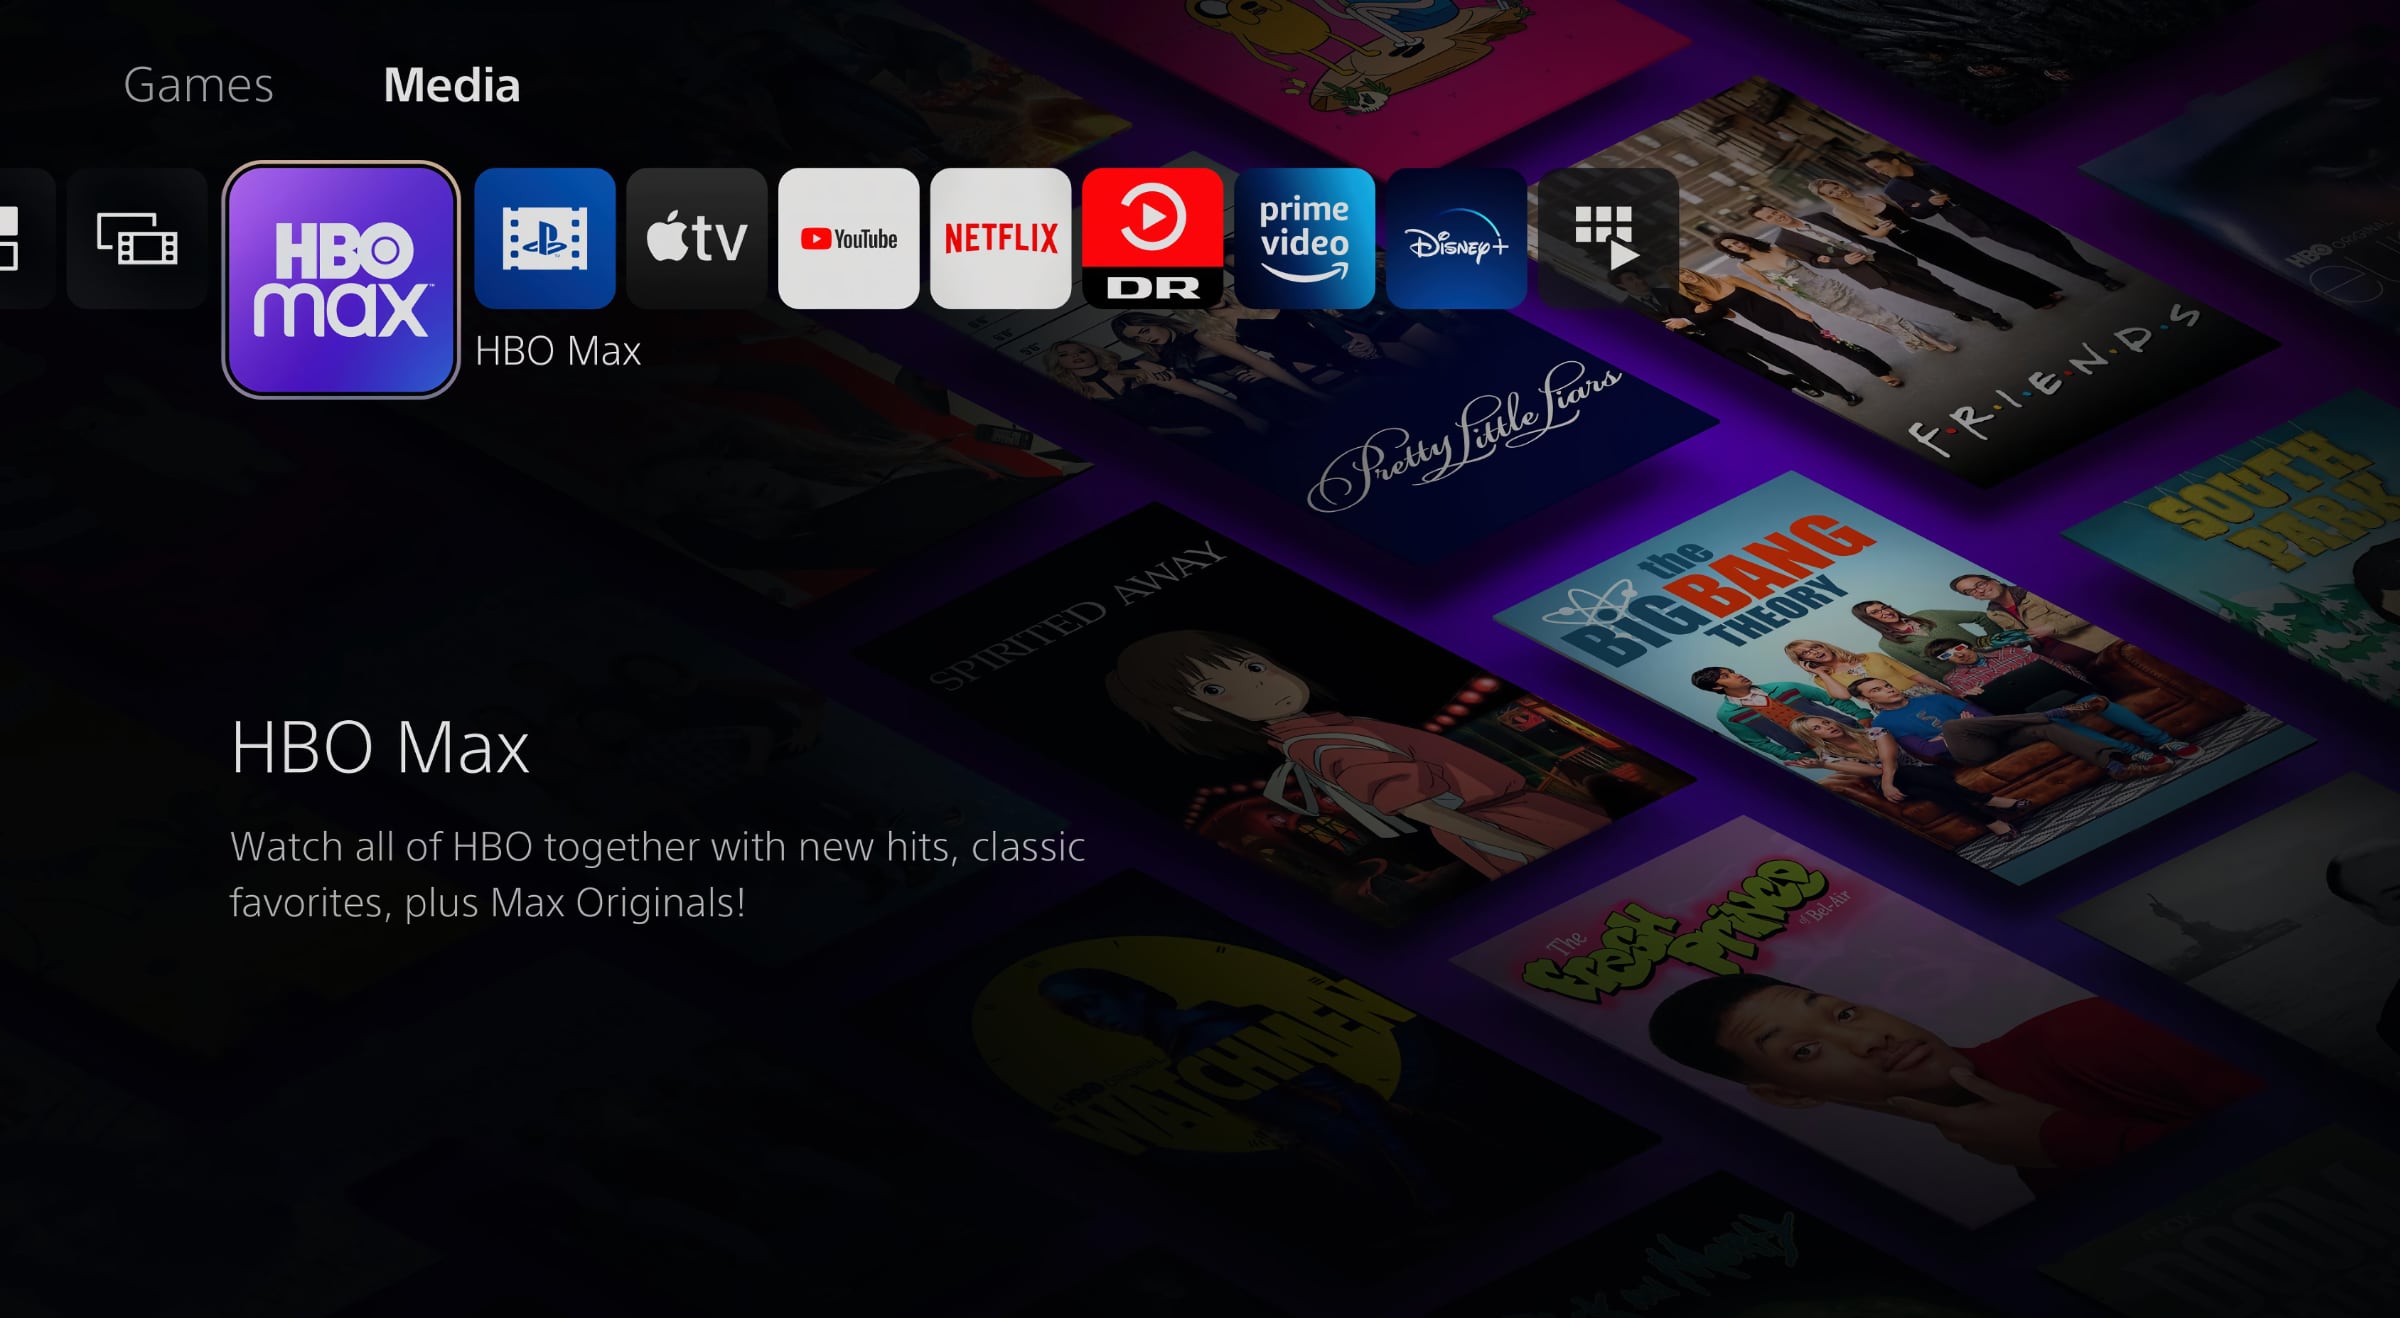 HBO Max now available on PlayStation - FlatpanelsHD